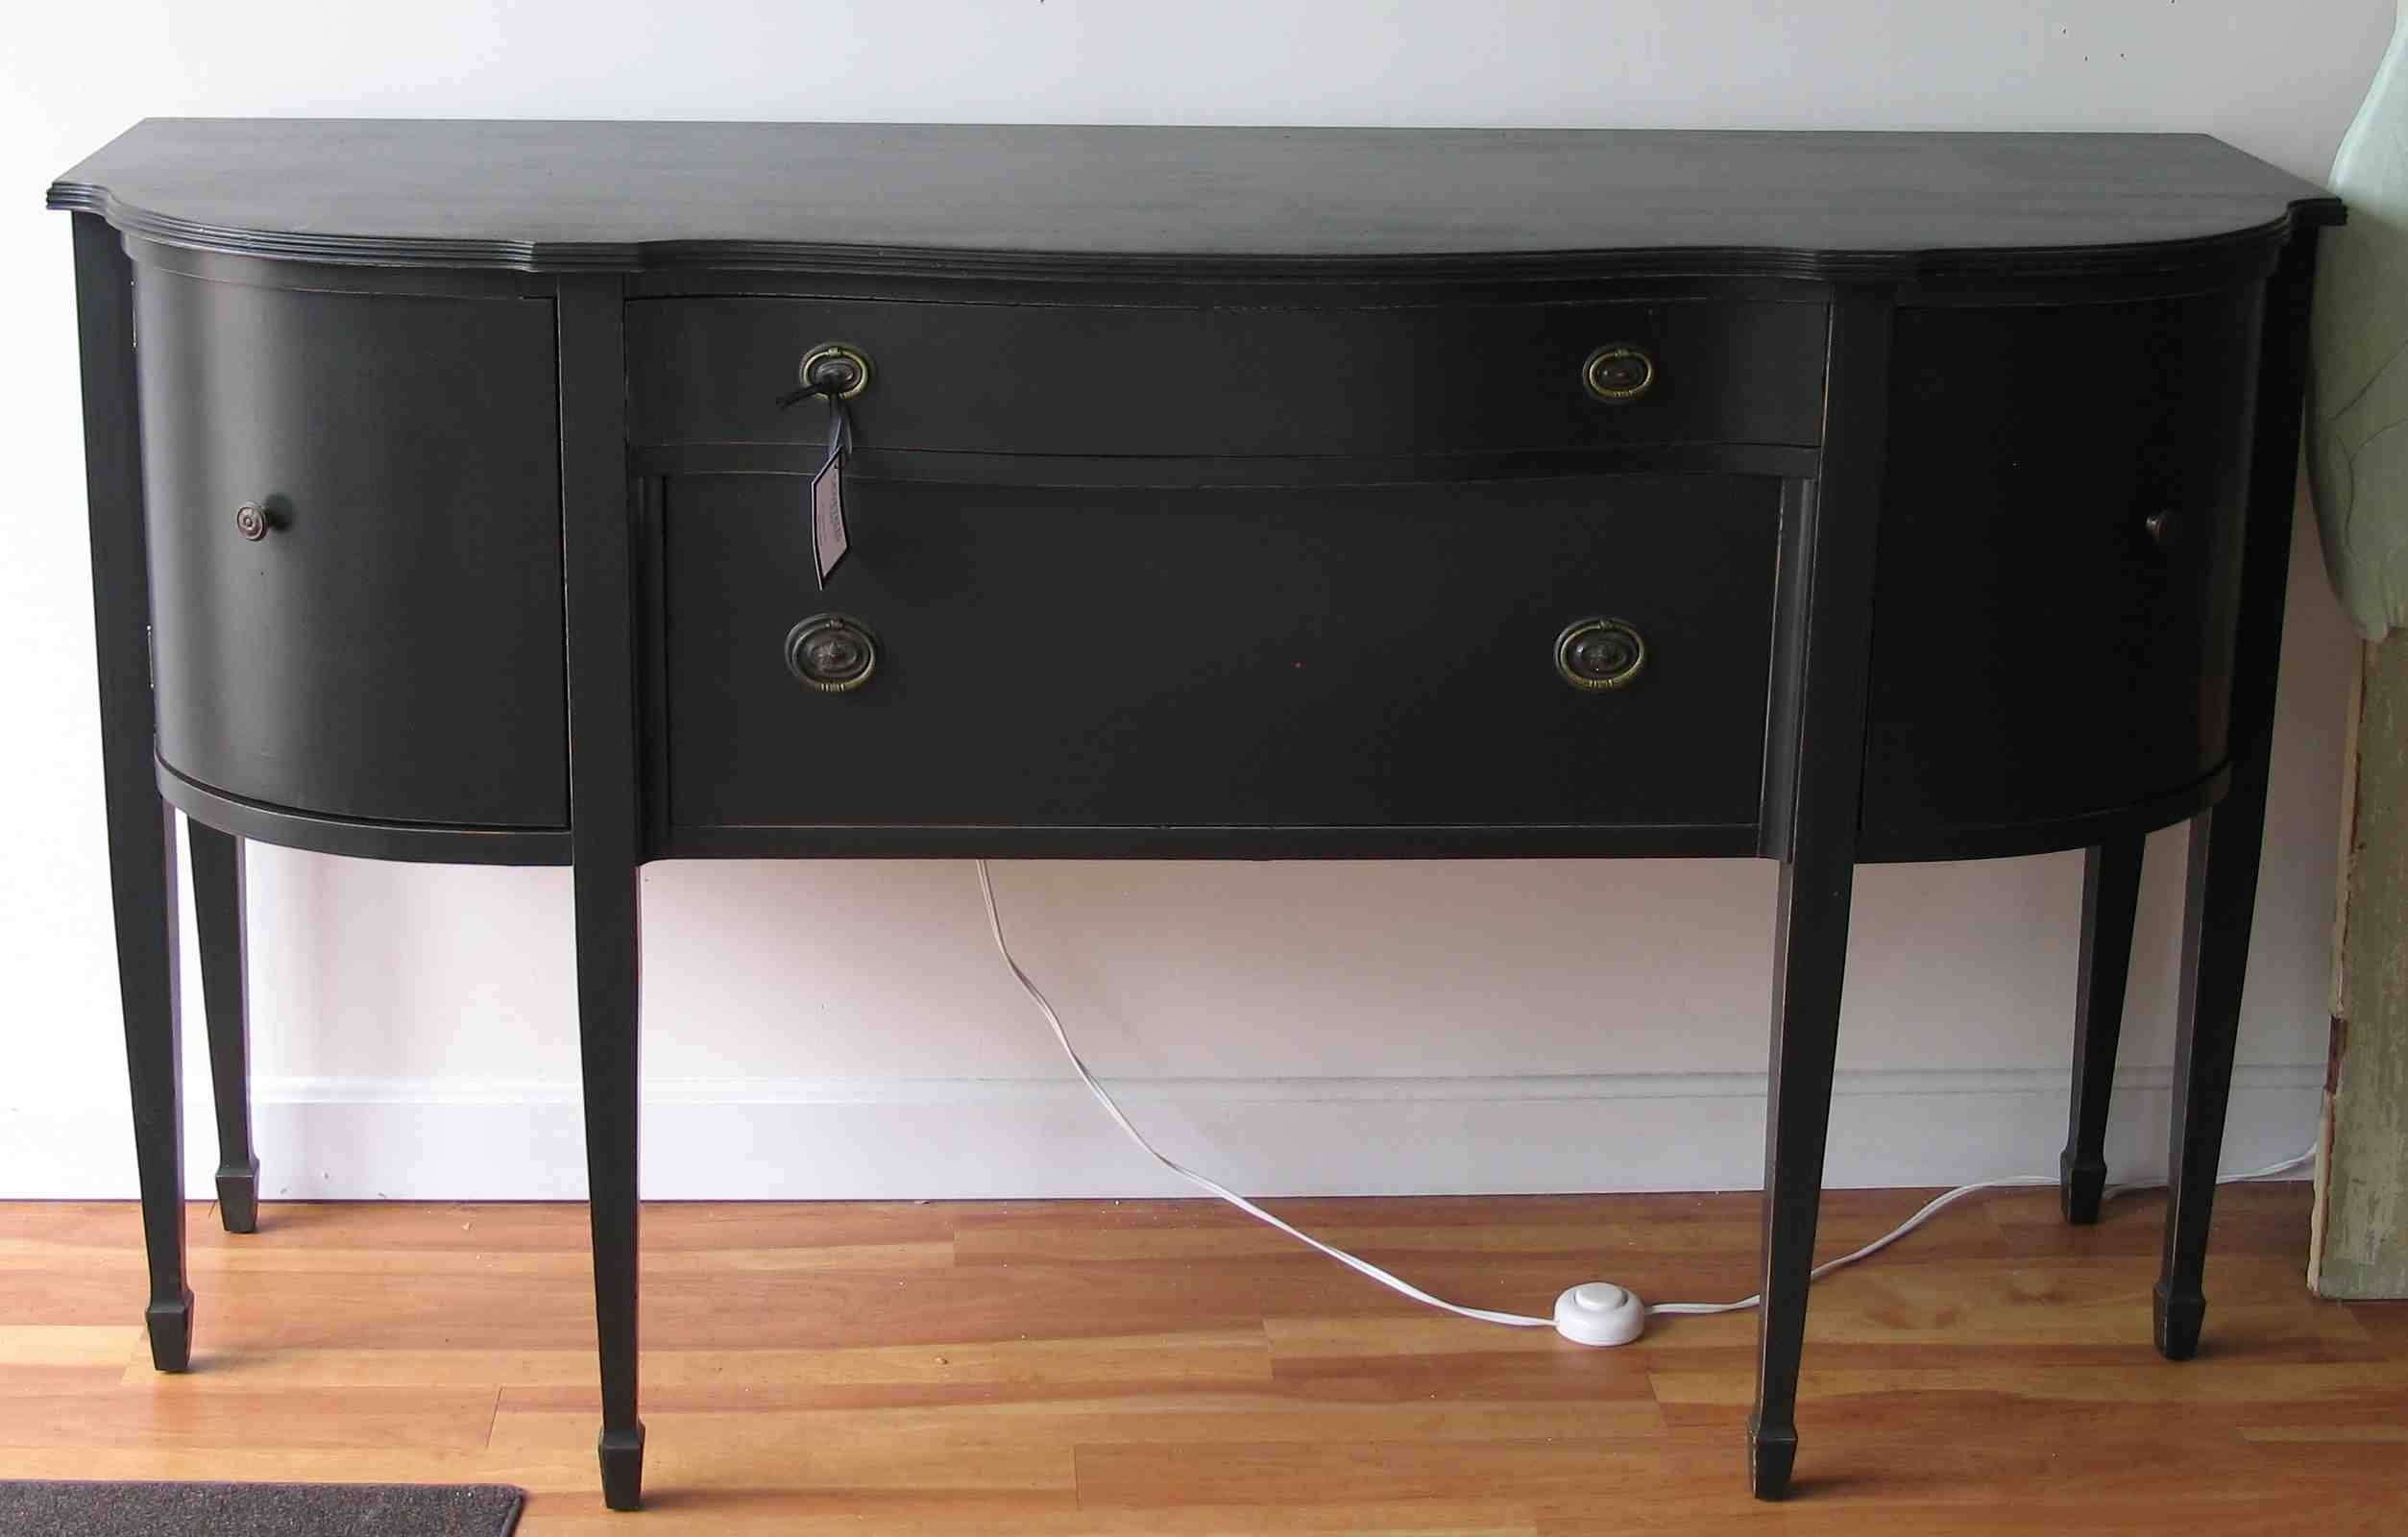 Semi Oval Black Wooden Table With Storage And Drawers Plus Long Intended For Black Sideboard Cabinets (Photo 12 of 15)